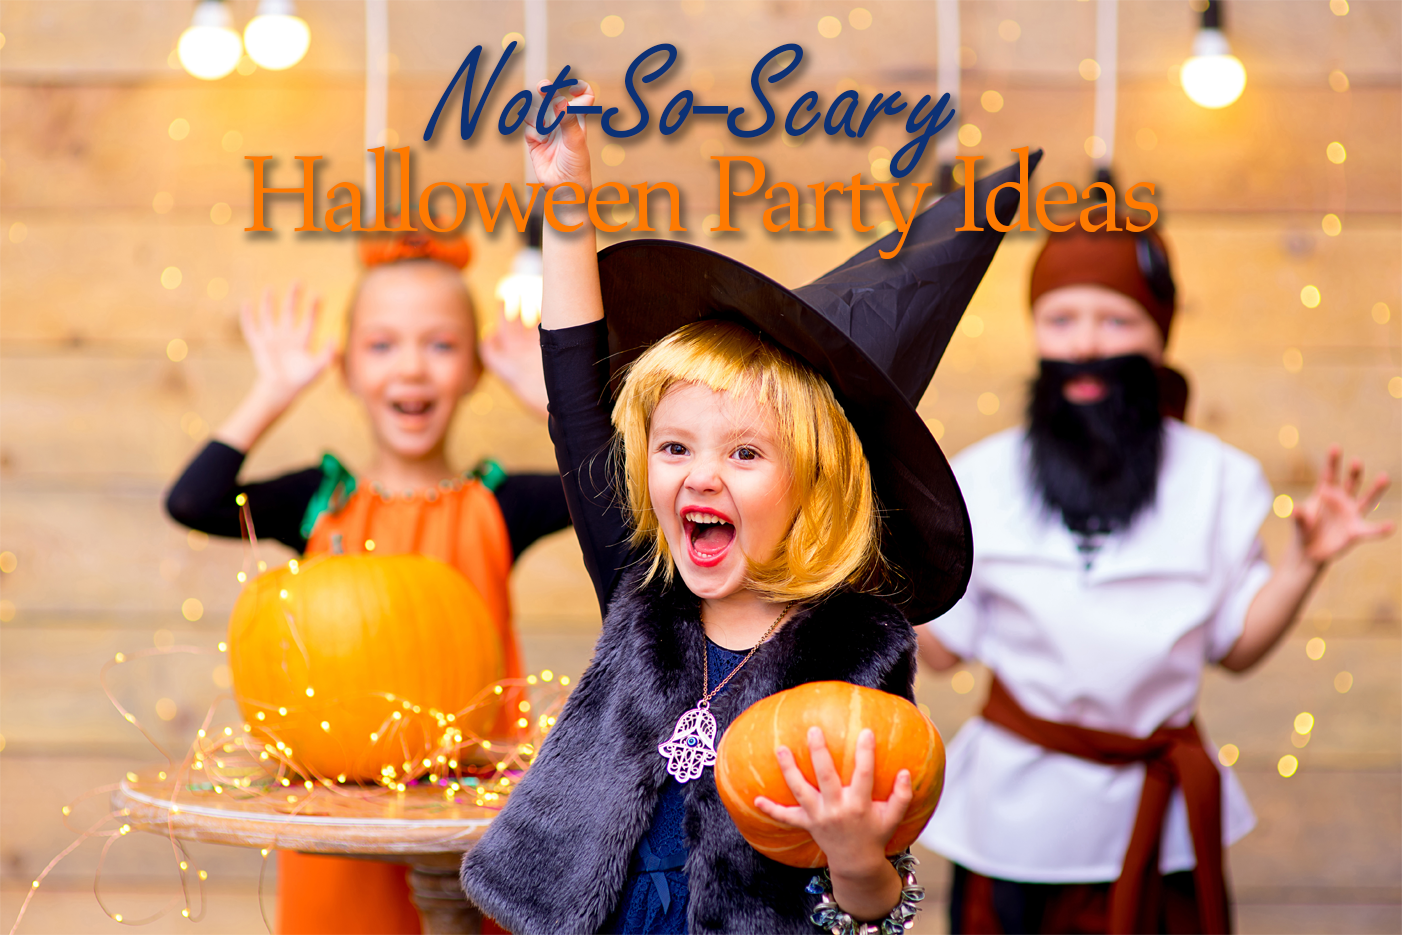 Not-So-Scary Halloween Party Ideas for Kids